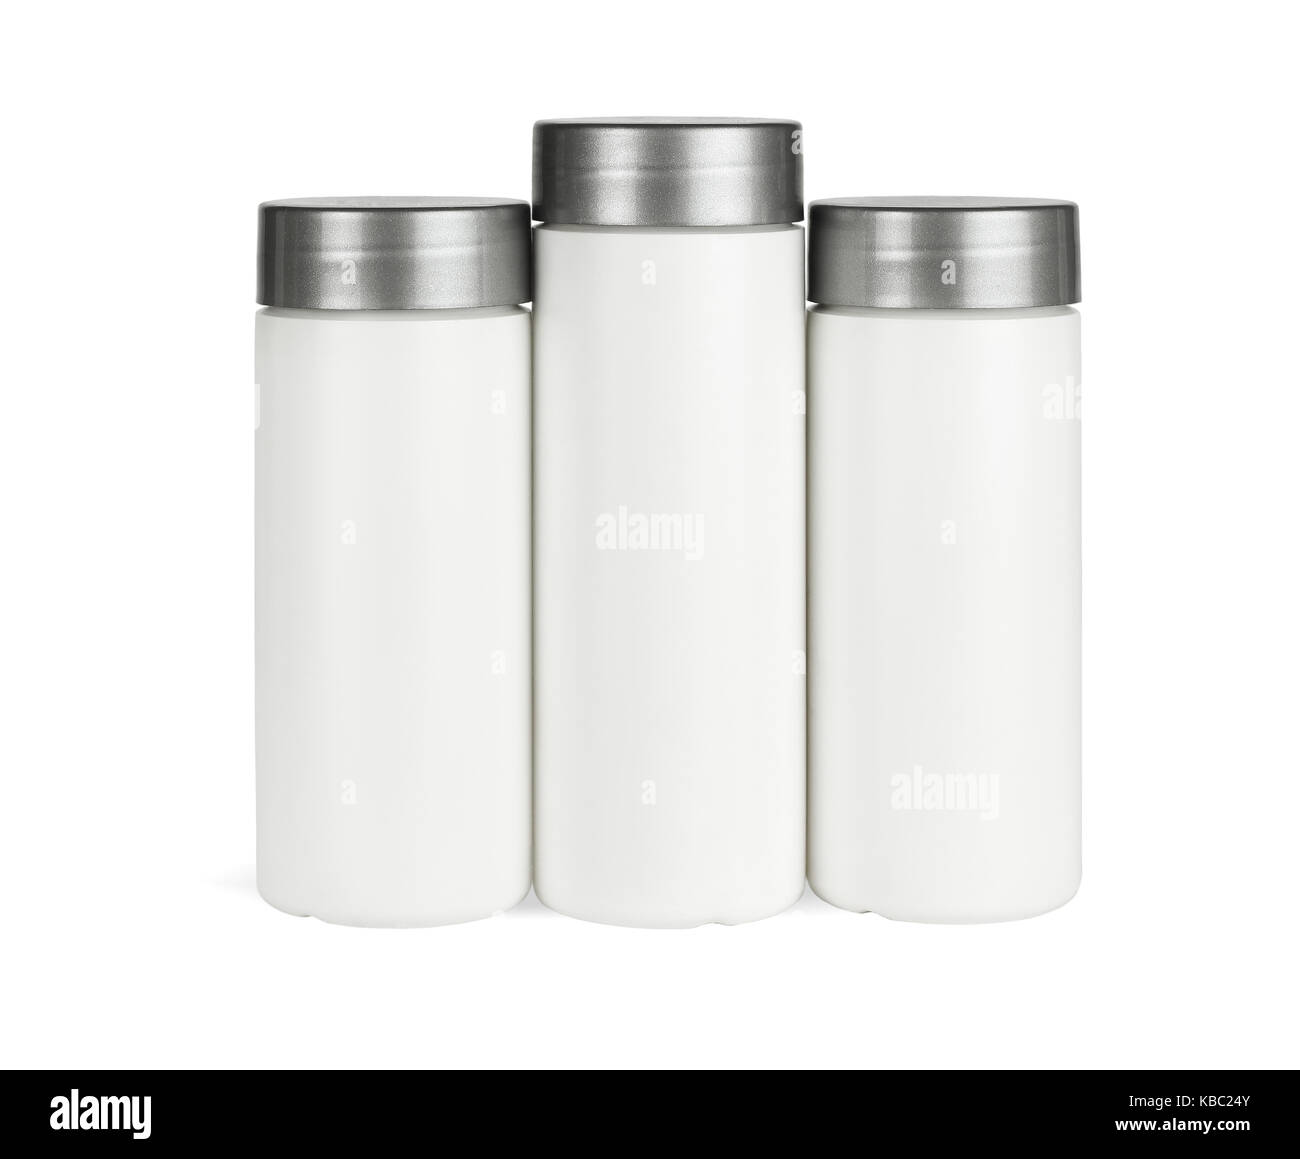 Row of Three Plastic Containers on White Background Stock Photo